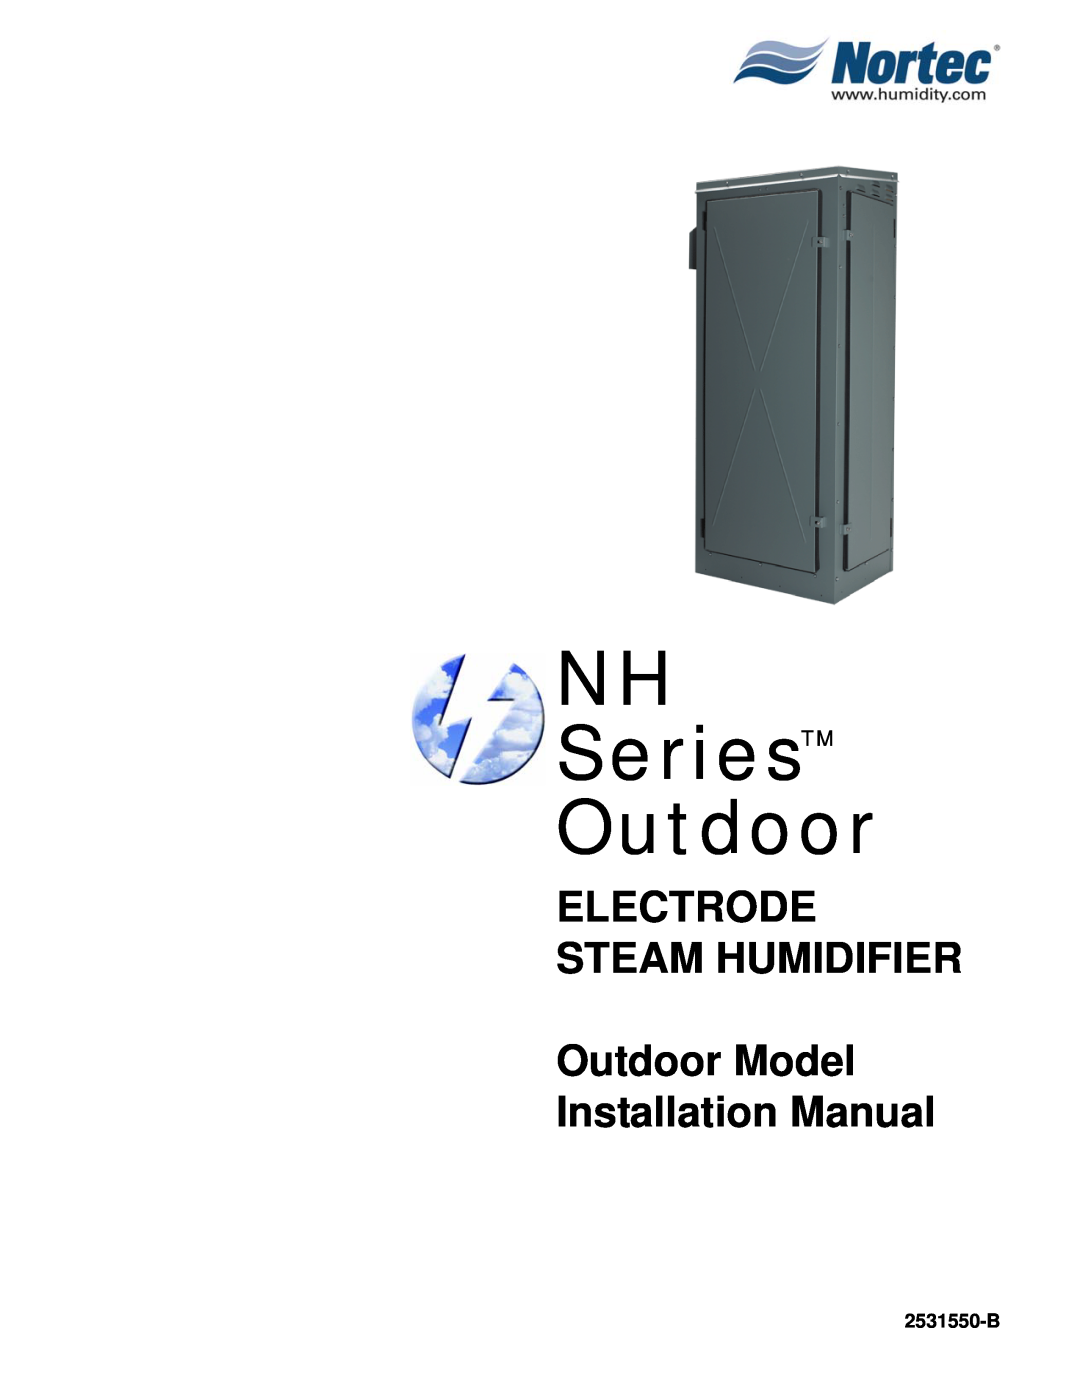 Nortec Industries installation manual 2531550-B, NH SeriesTM Outdoor, Electrode Steam Humidifier 